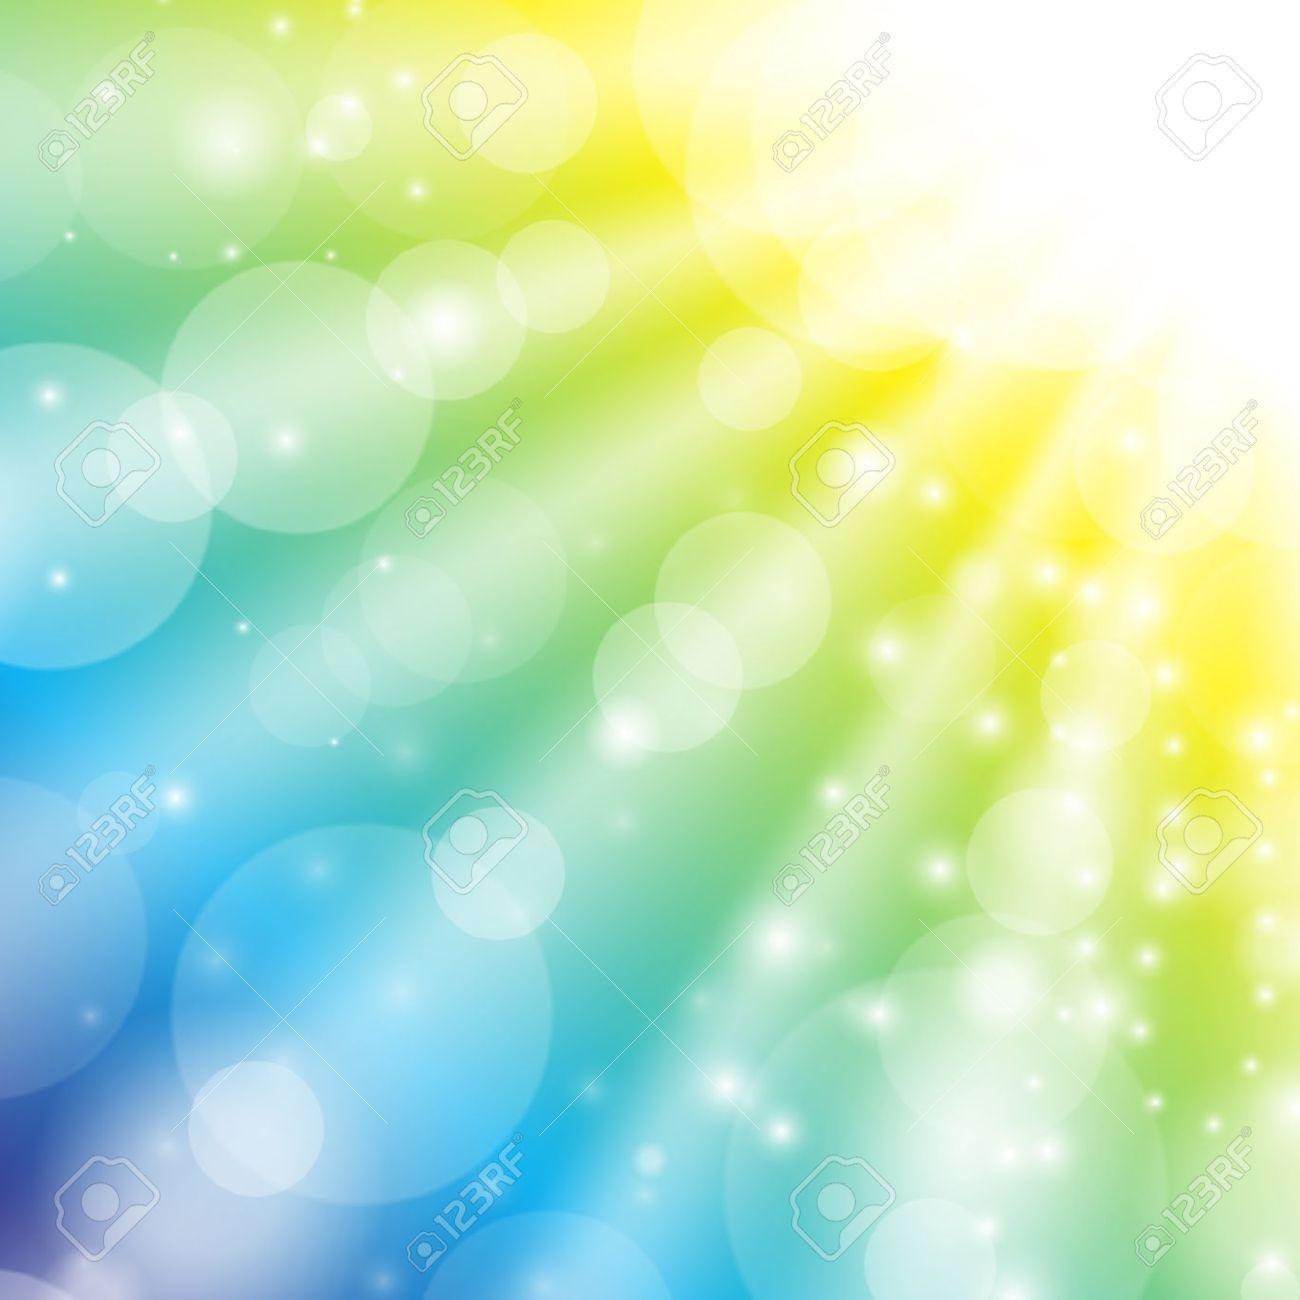 10648414 Vector Blurry Summer View With Stock Vector Summer